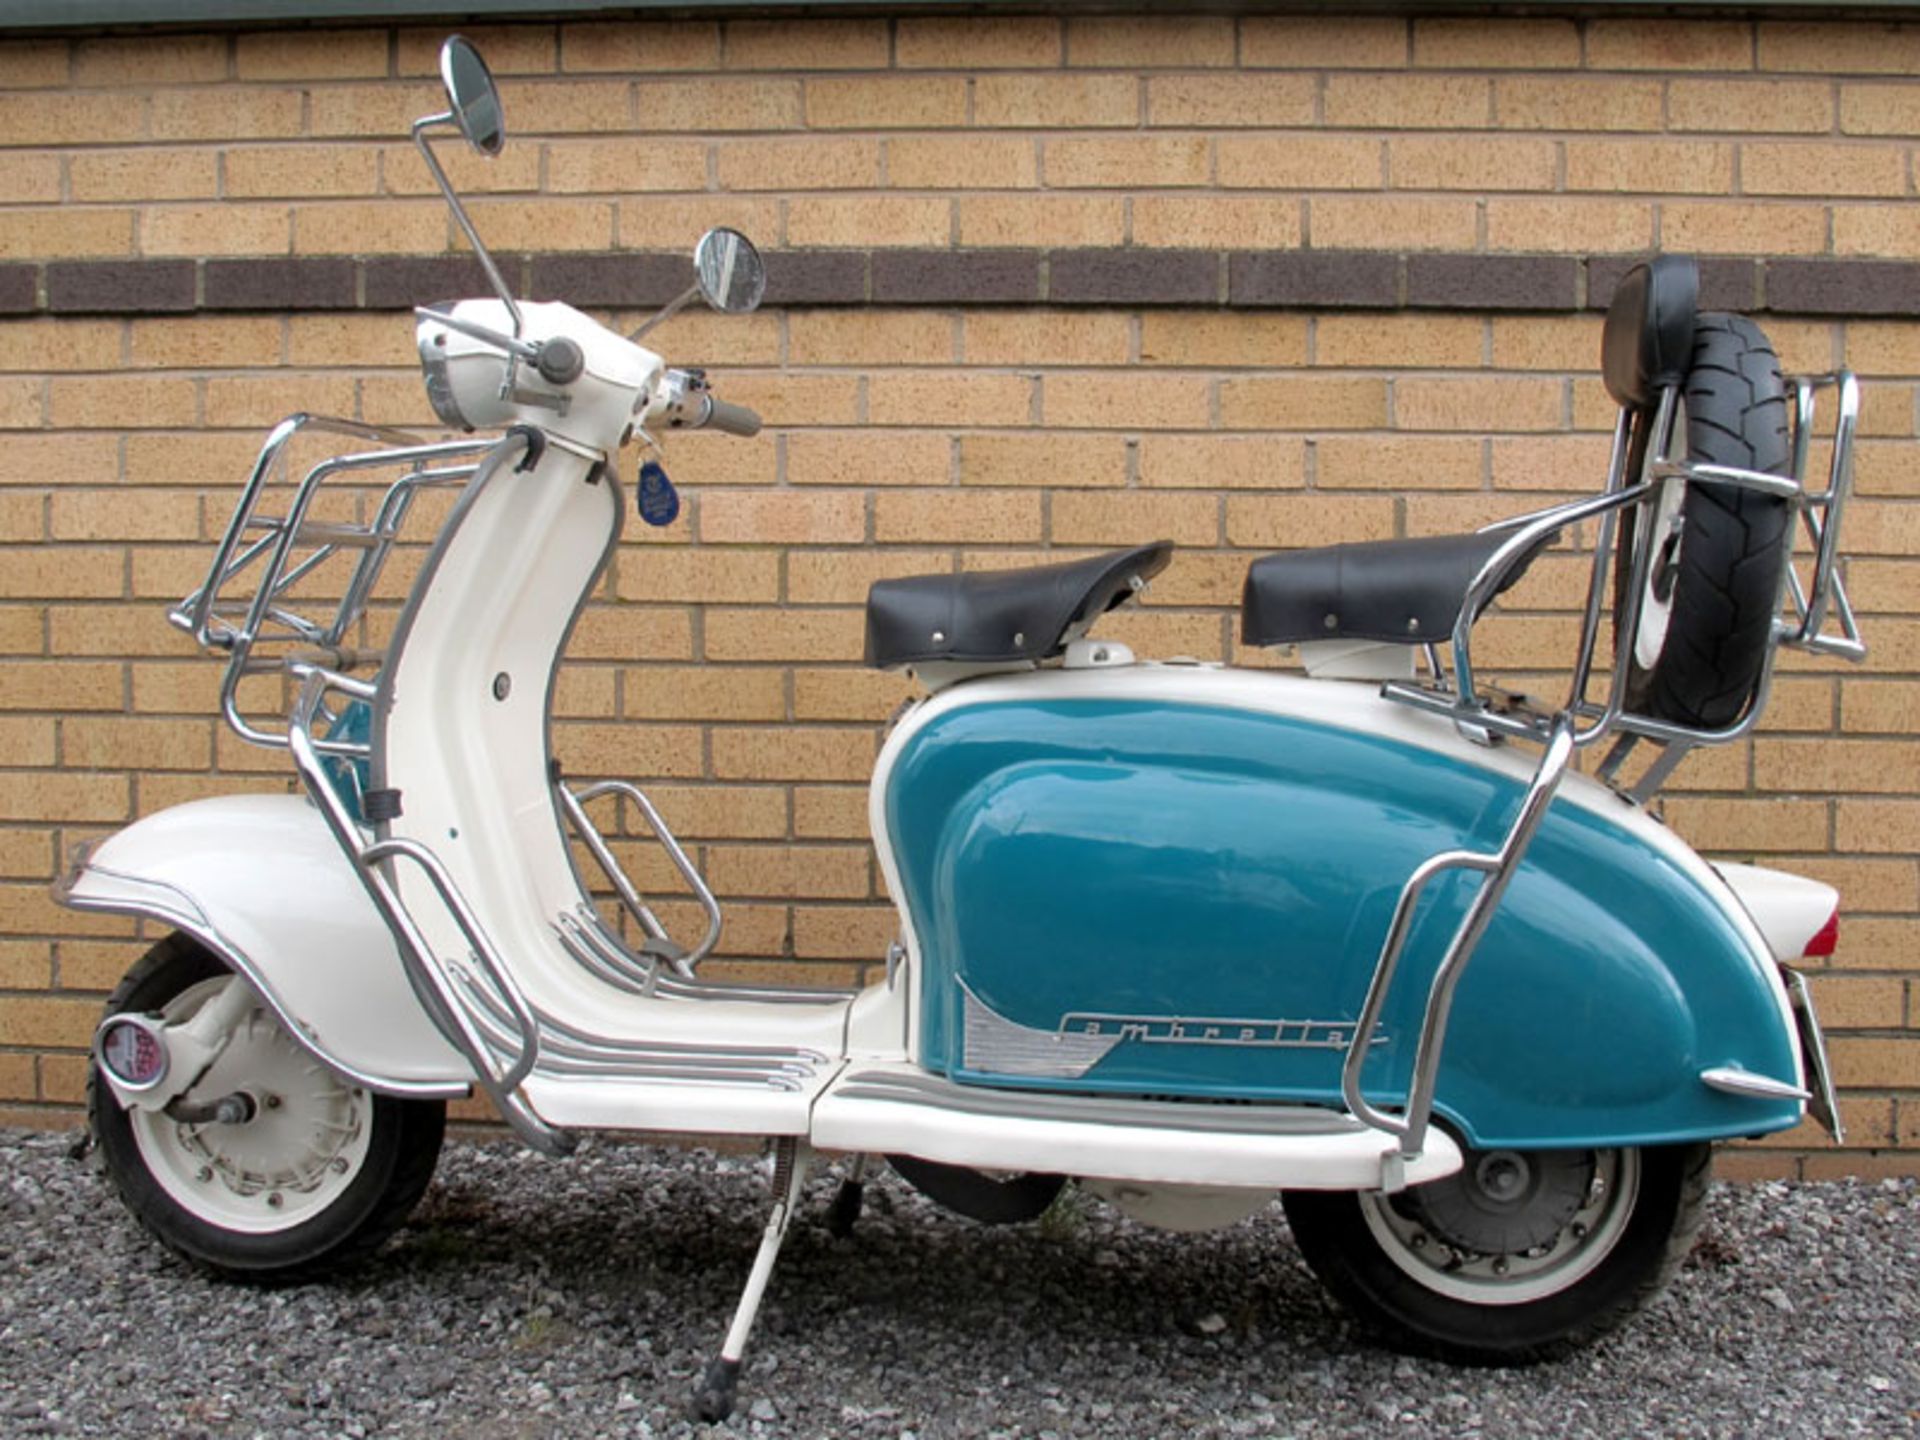 - Restored example

- Original specification

- Iconic 60's Scooter - Image 2 of 4